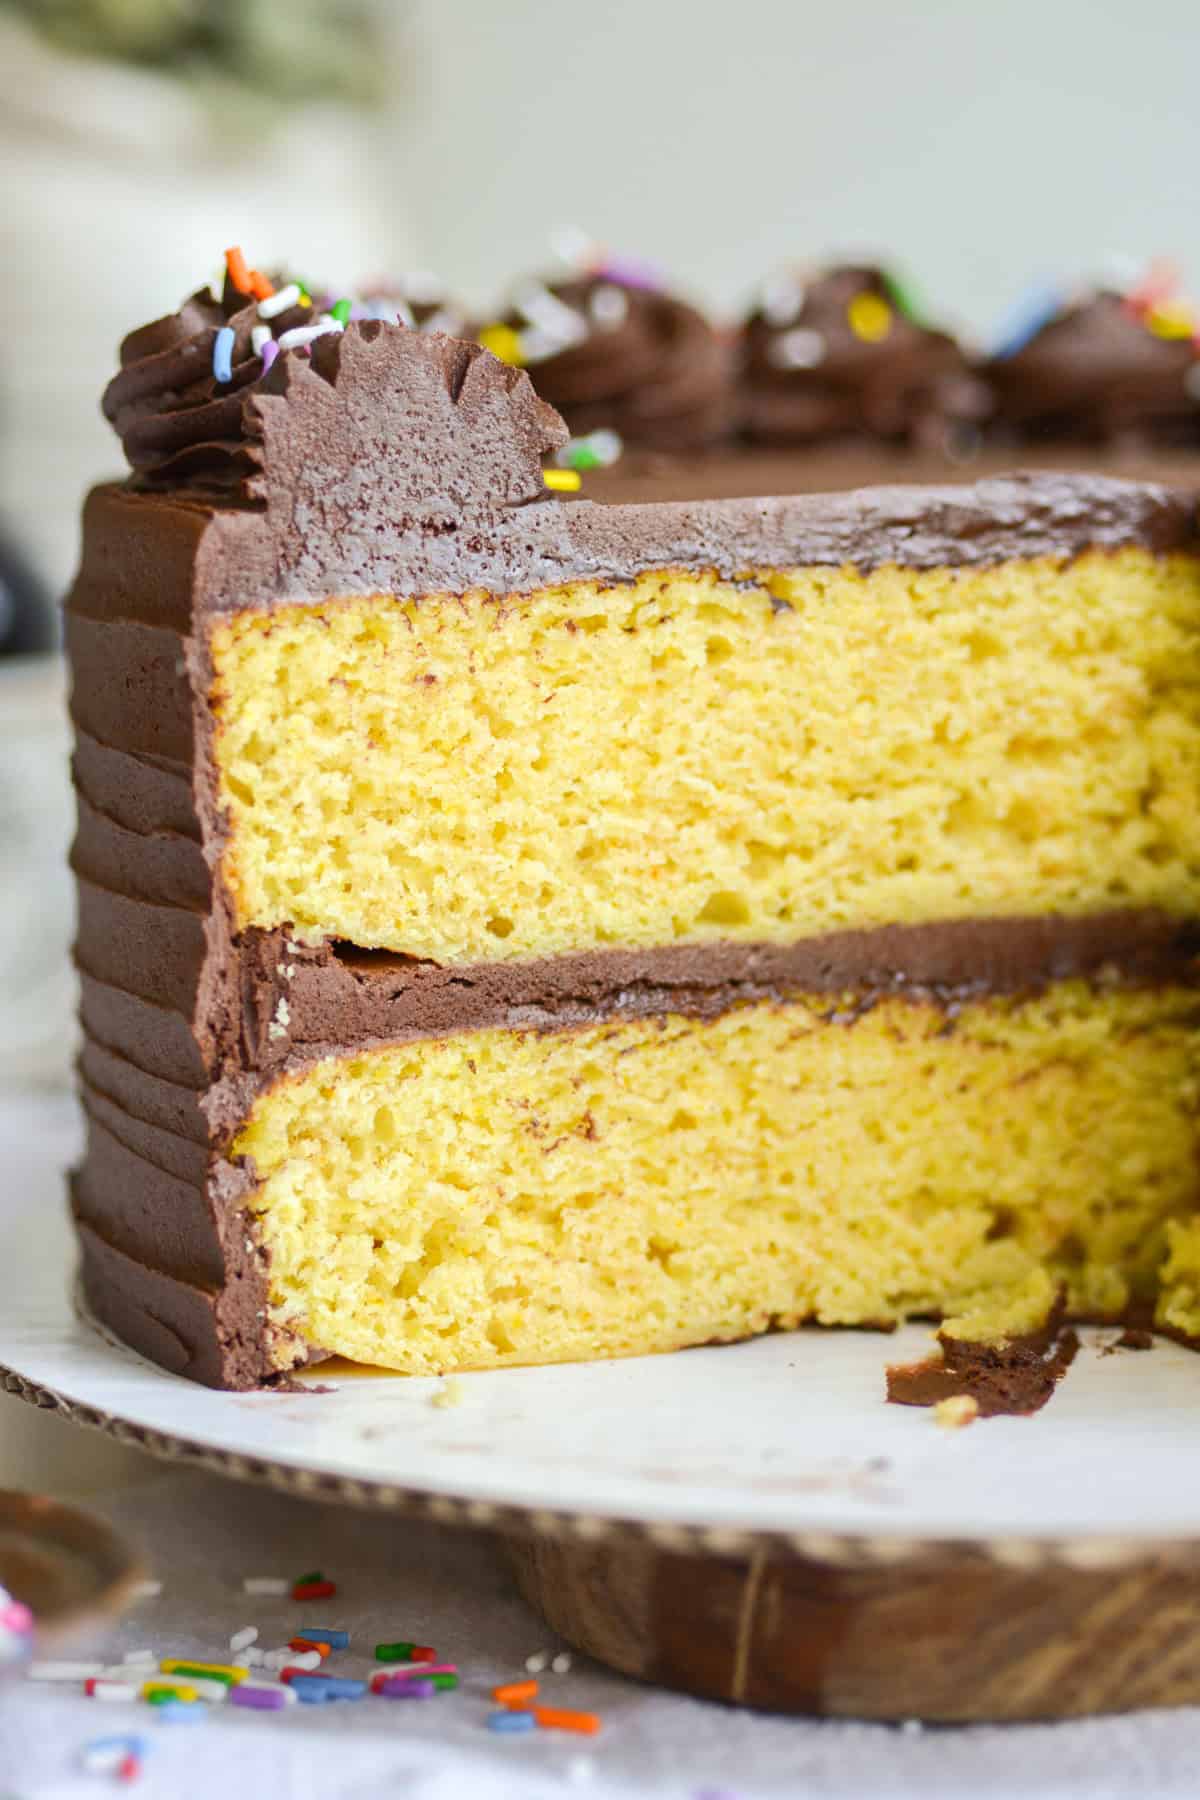 Vegan Birthday cake with slices taken out of it to show the cross-section of the cake. Two layers of yellow cake with chocolate frosting in between and on top.